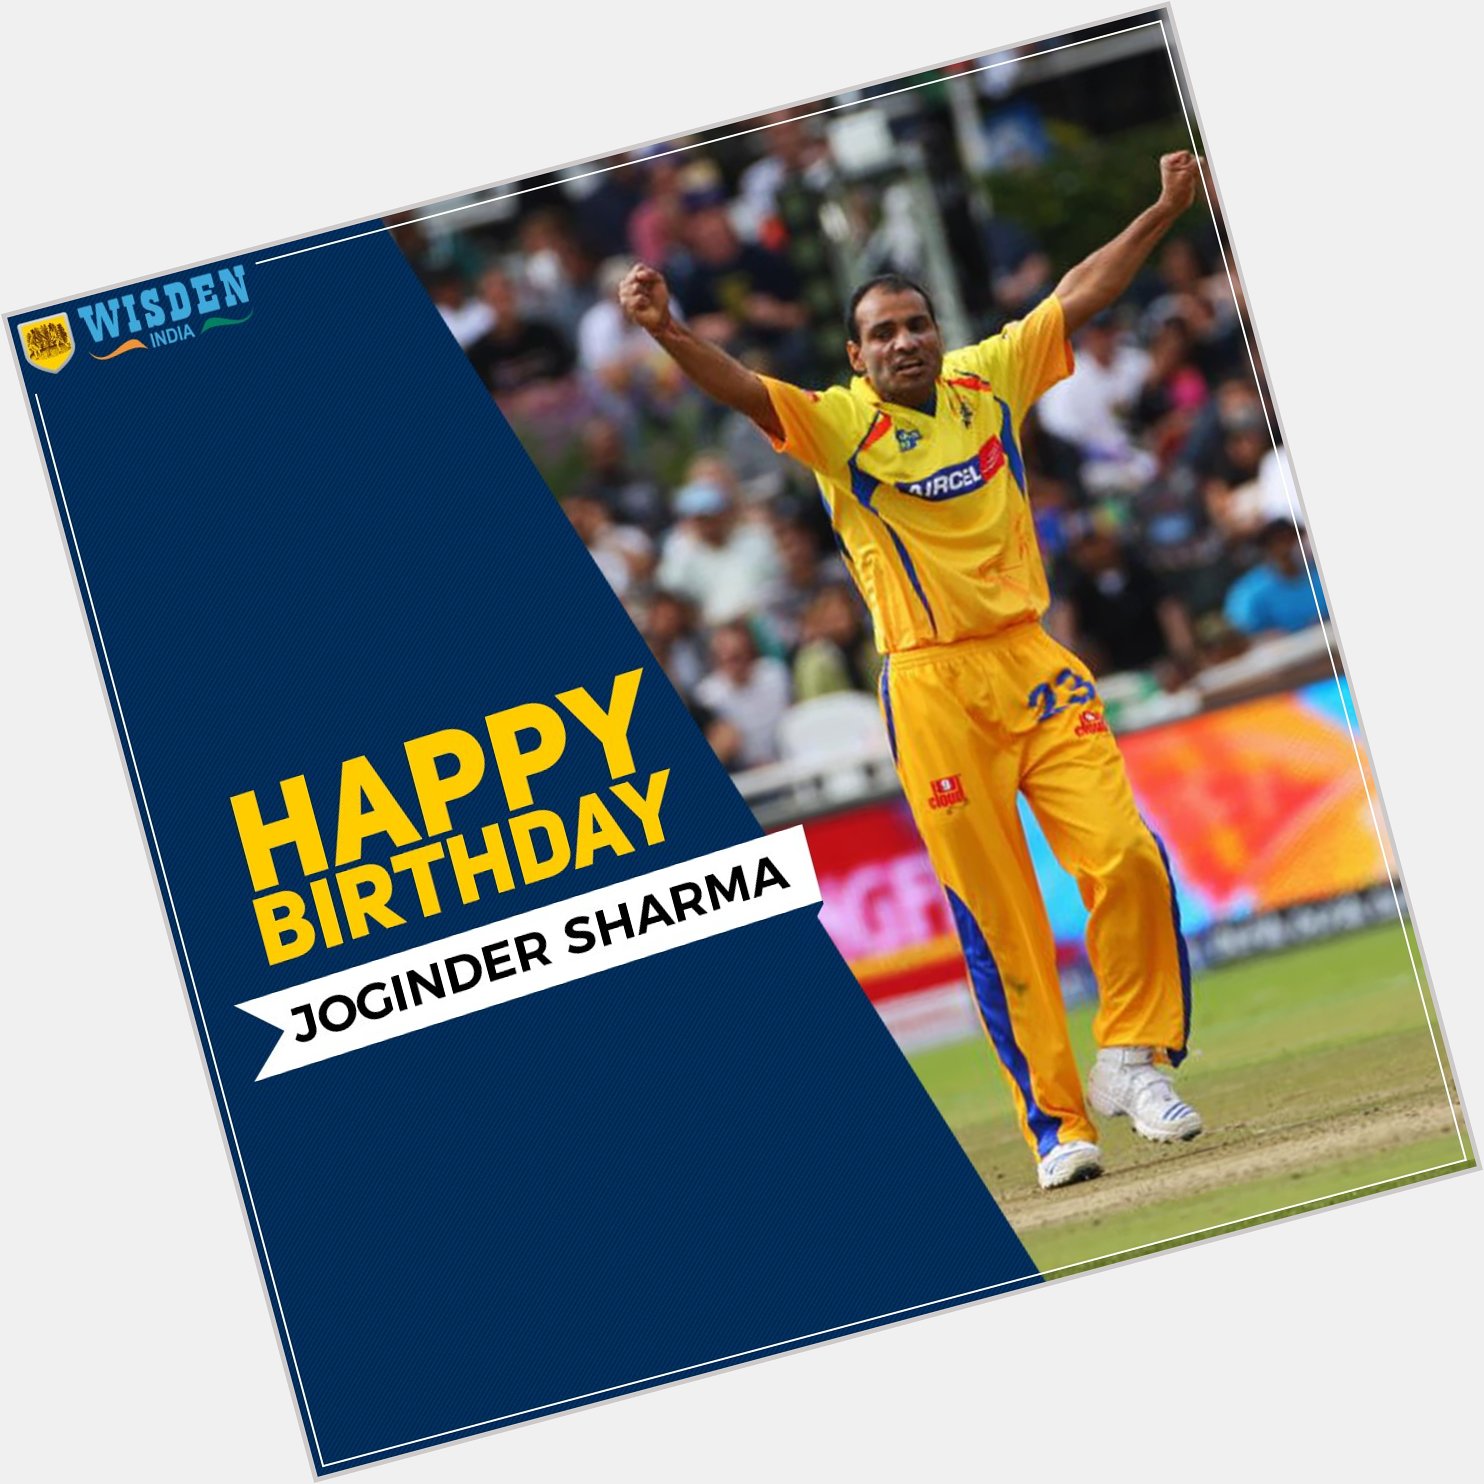 He bowled the famous final over against Pakistan in the 2007 WT20 final. Happy Birthday Joginder Sharma! 